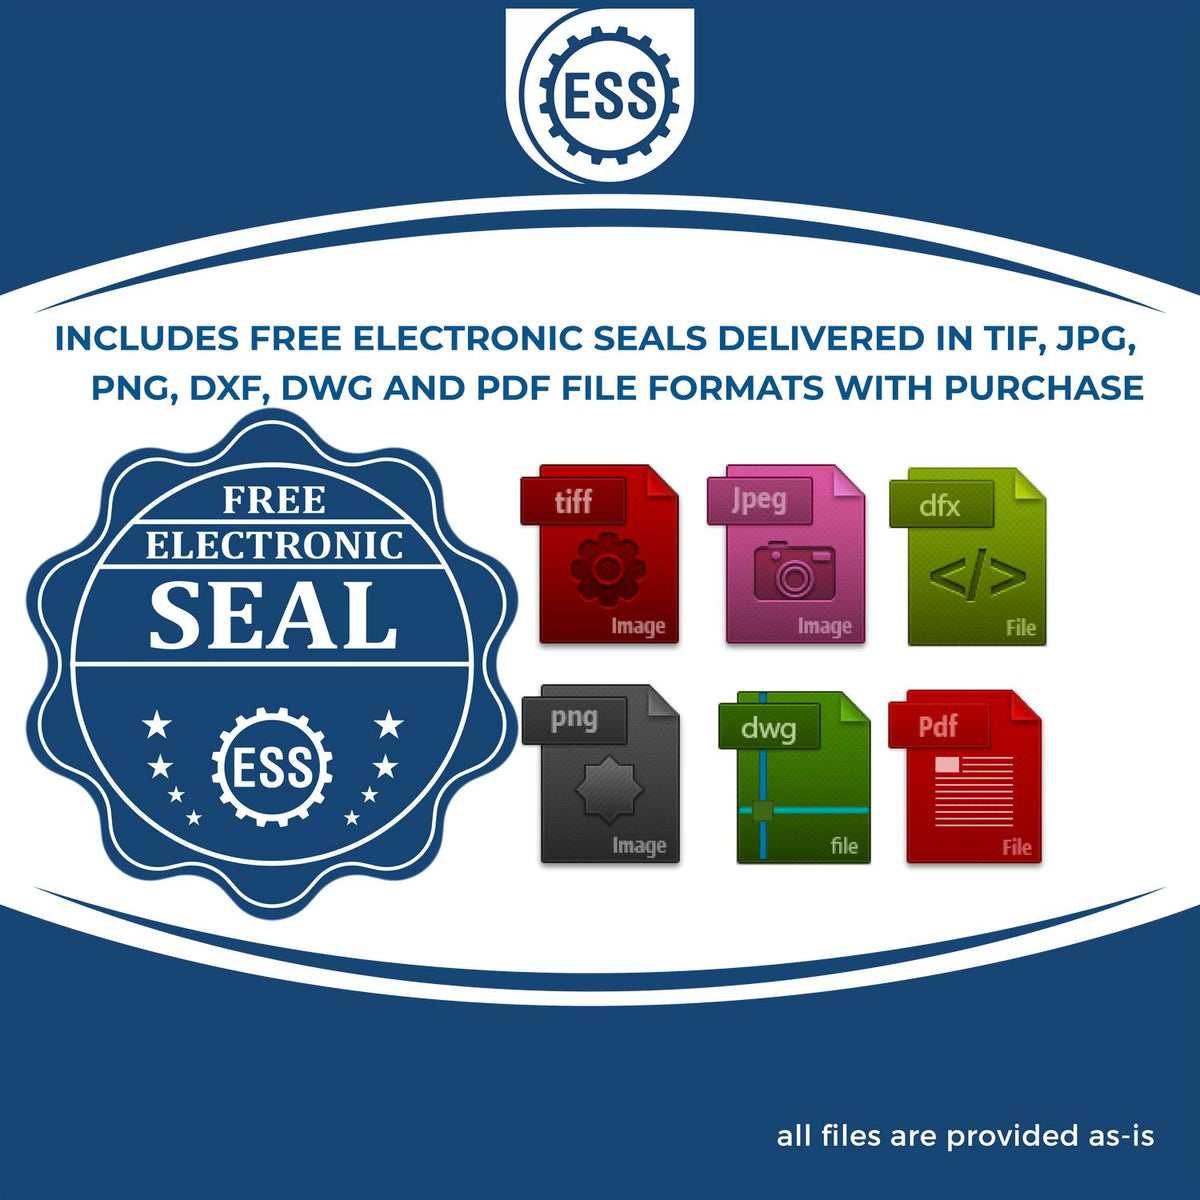 An infographic for the free electronic seal for the Heavy Duty Cast Iron Washington Architect Embosser illustrating the different file type icons such as DXF, DWG, TIF, JPG and PNG.